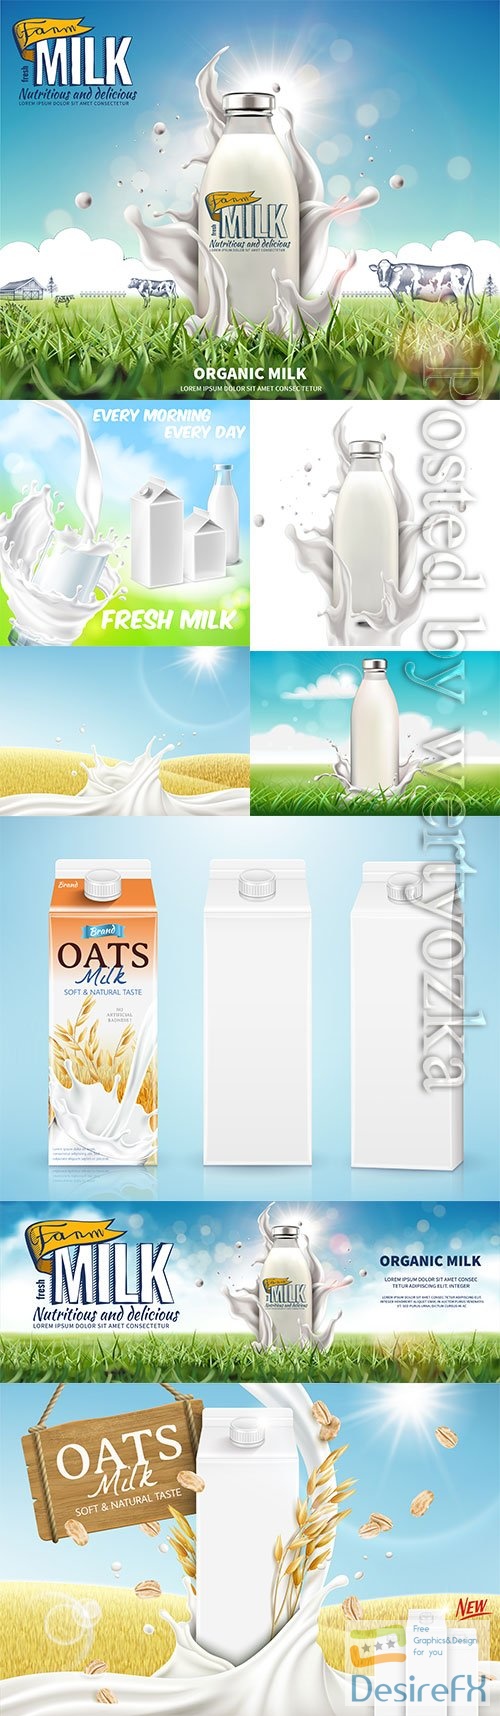 Milk banner with swirling liquid and blank carton box on golden grain field in 3d illustration